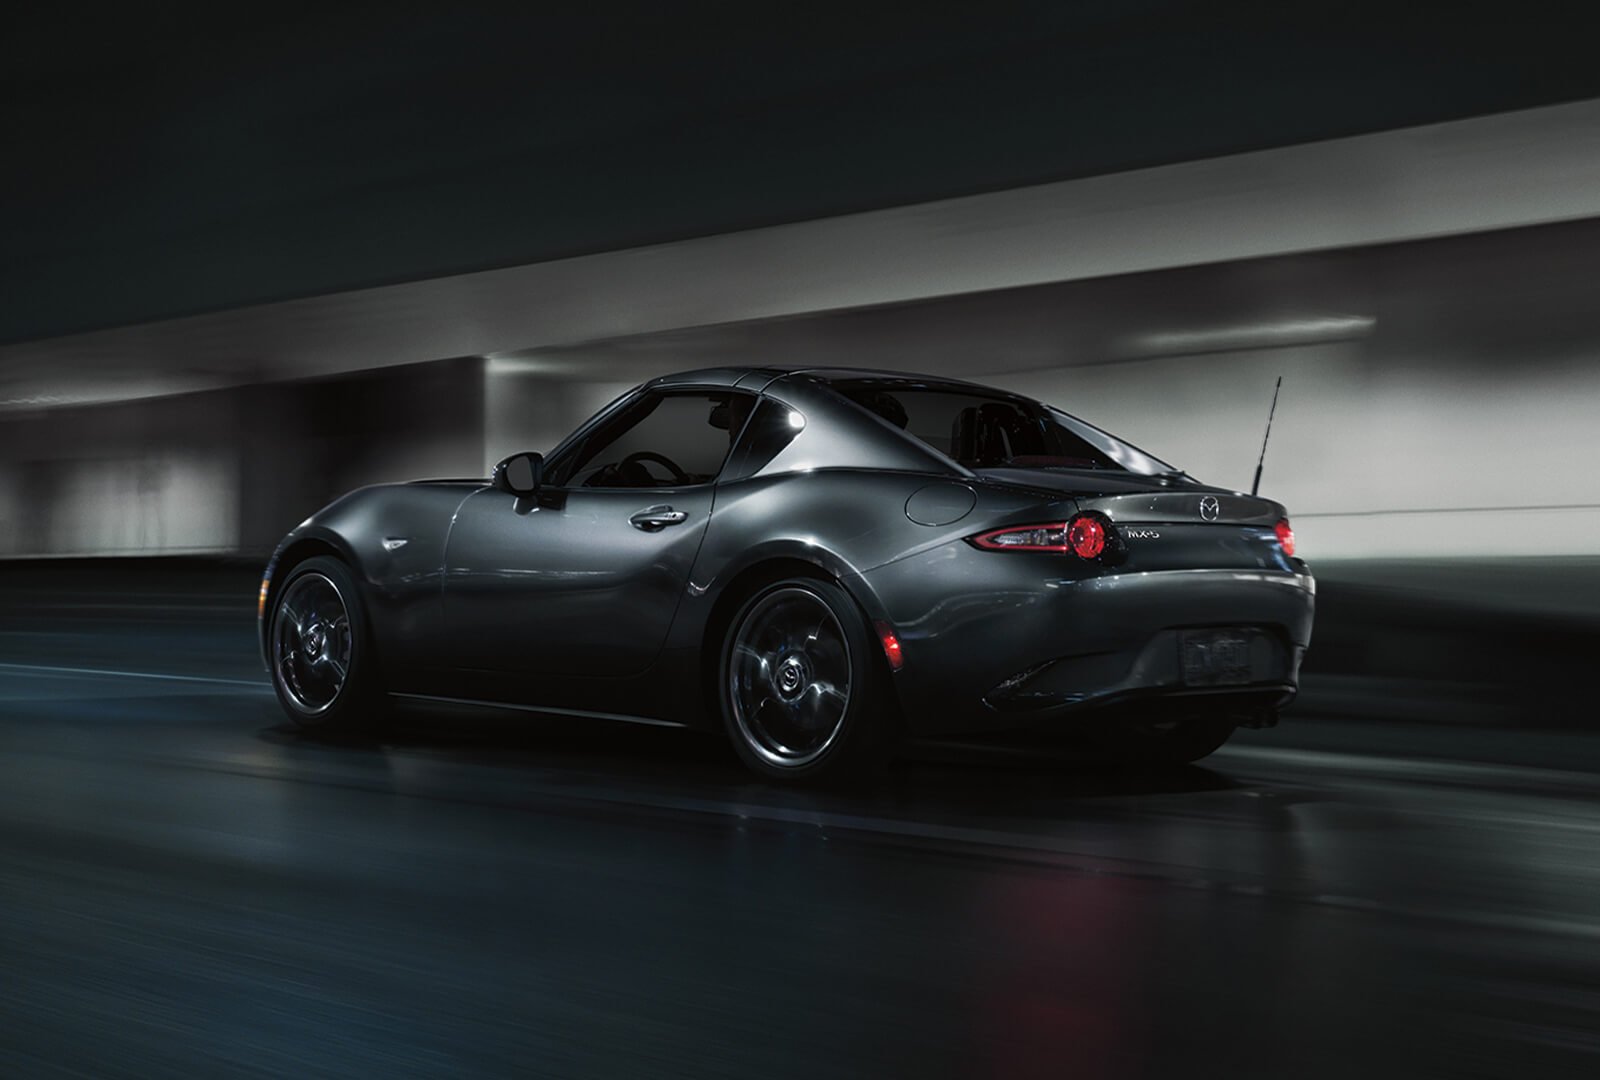 Gleaming Polymetal Grey Metallic Mazda MX-5 RF with roof up pulls away past blurred tunnel walls.